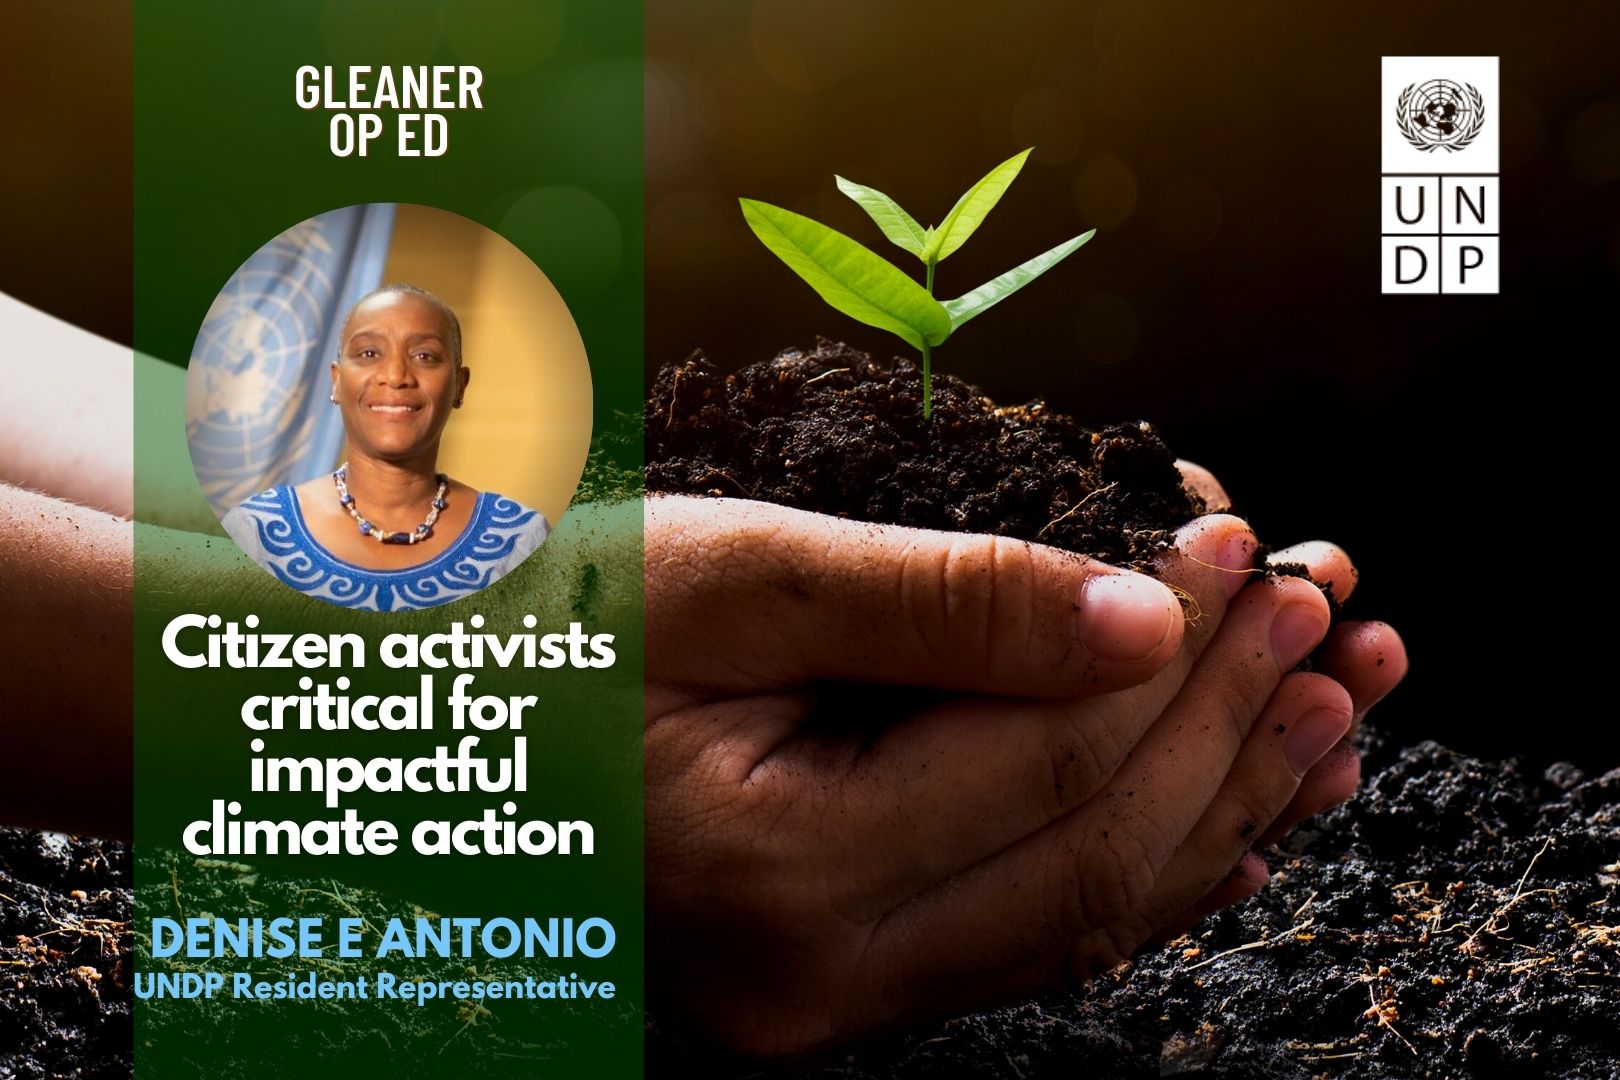 Wanted: Citizen activists to take Climate Action to the Next Level for Greater Impact